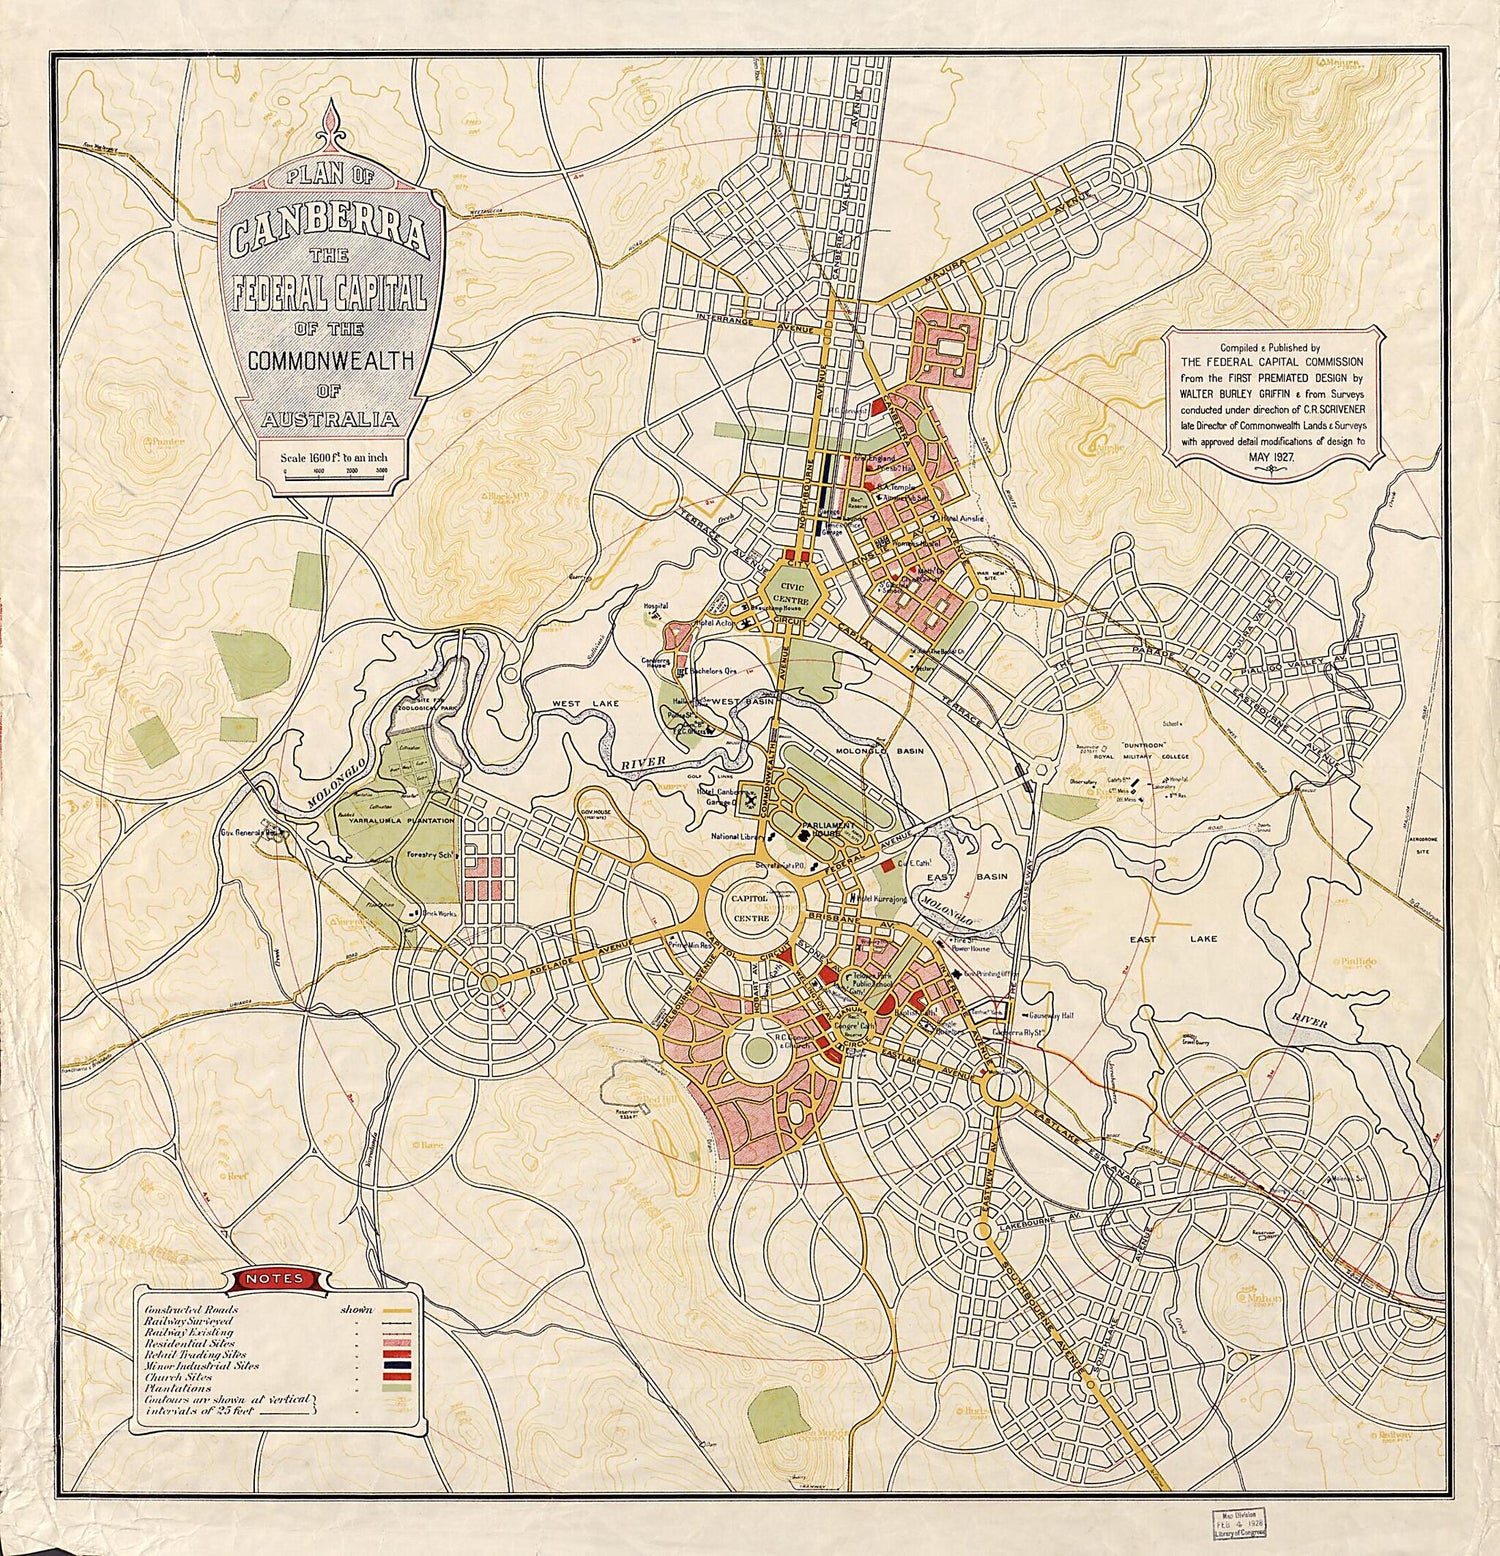 This old map of Plan of Canberra, the Federal Capital of the Commonwealth of Australia from 1927 was created by  Australia. Federal Capital Commission, Walter Burley Griffin in 1927